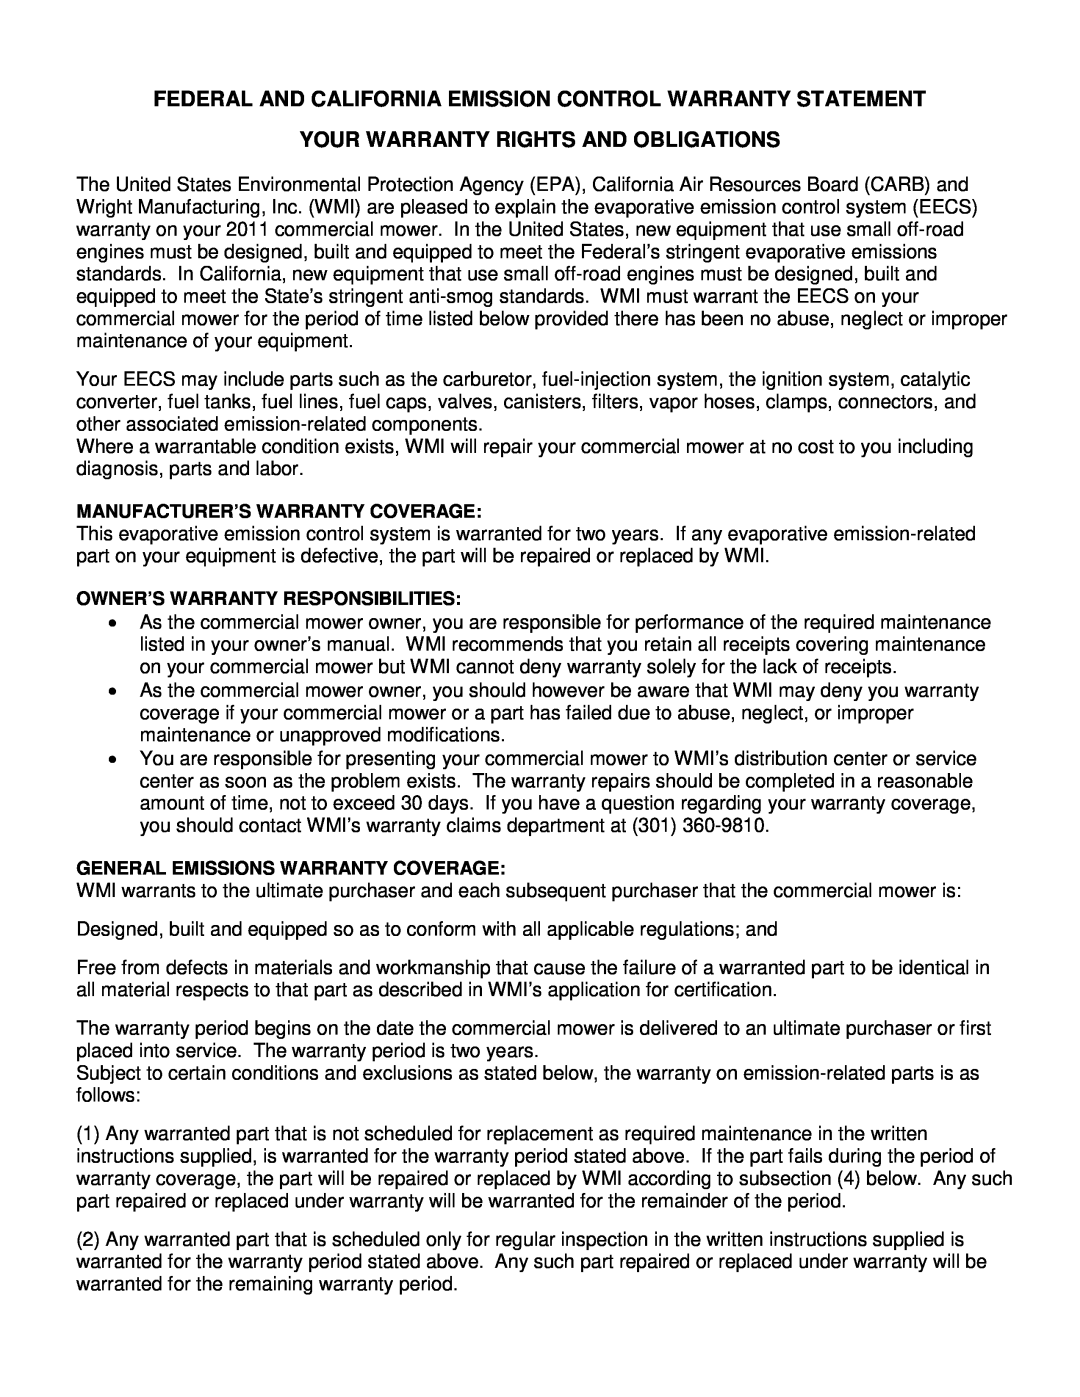 Wright Manufacturing 14SH654 Federal And California Emission Control Warranty Statement, Manufacturer’S Warranty Coverage 